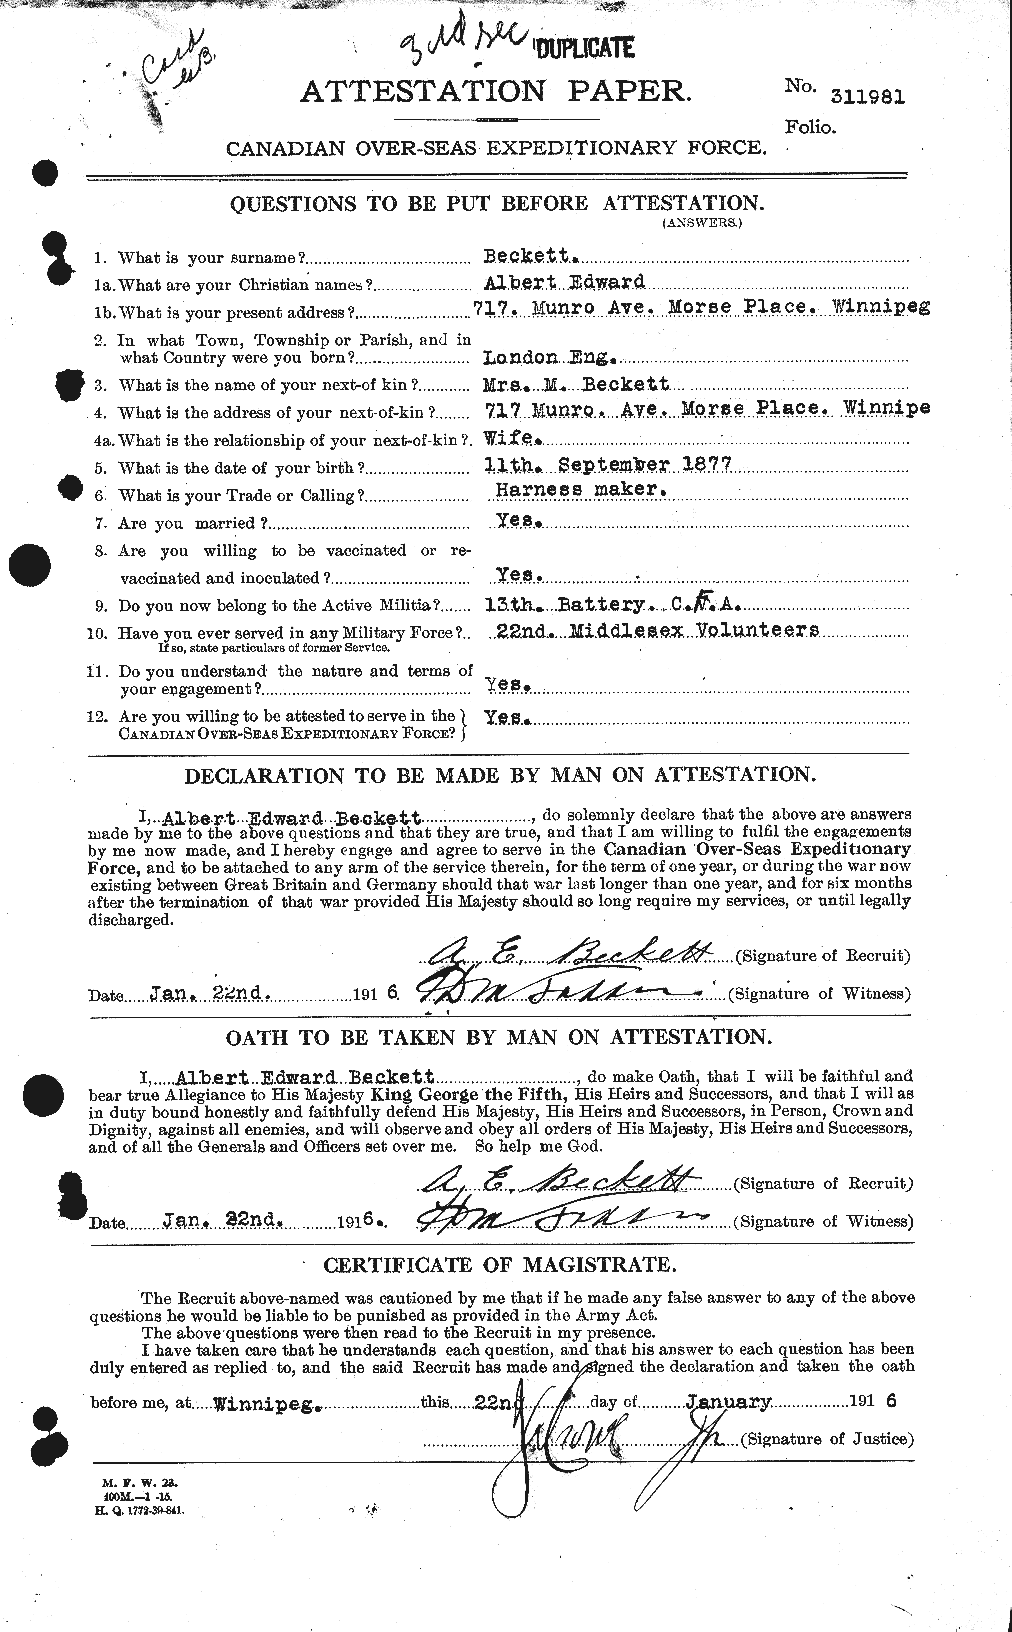 Personnel Records of the First World War - CEF 232333a